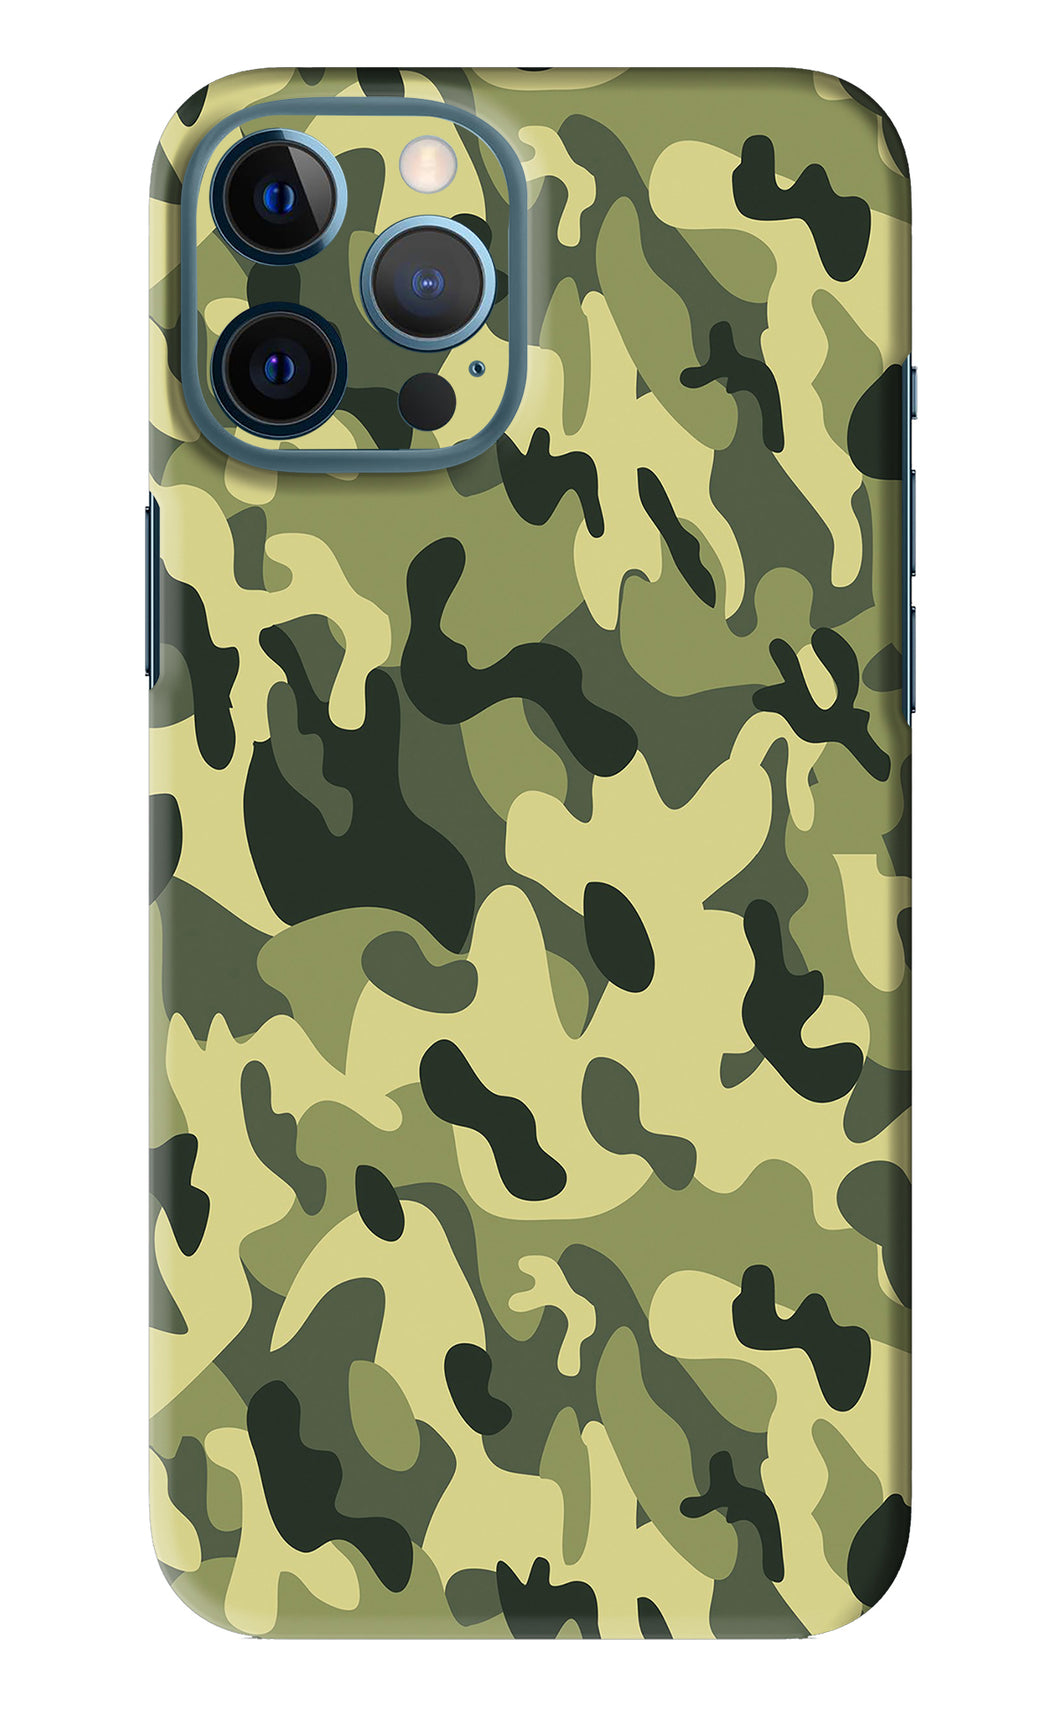 Camouflage iPhone 12 Pro Max Back Skin Wrap